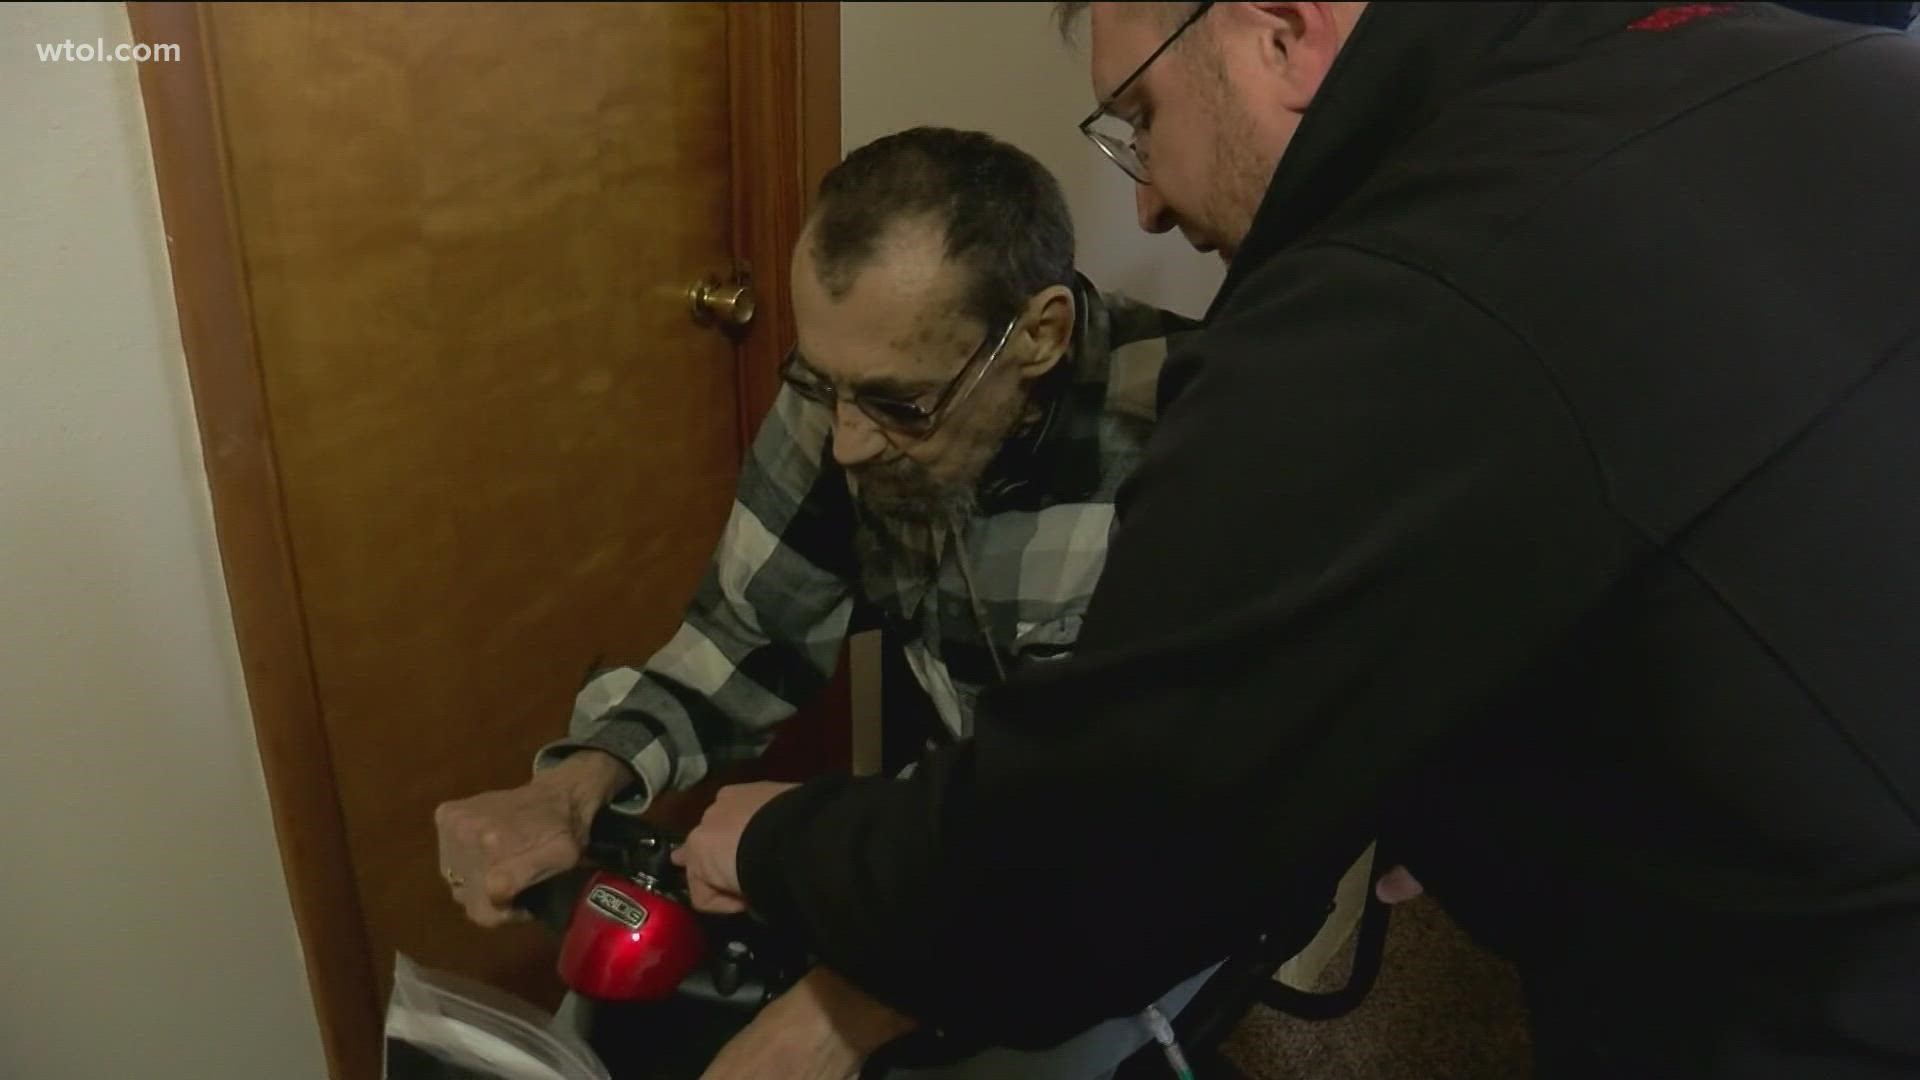 A Toledoan with mobility issues was scammed out of a motorized scooter through a phony social media sales post. After our report, a local company came to Jack's aid.